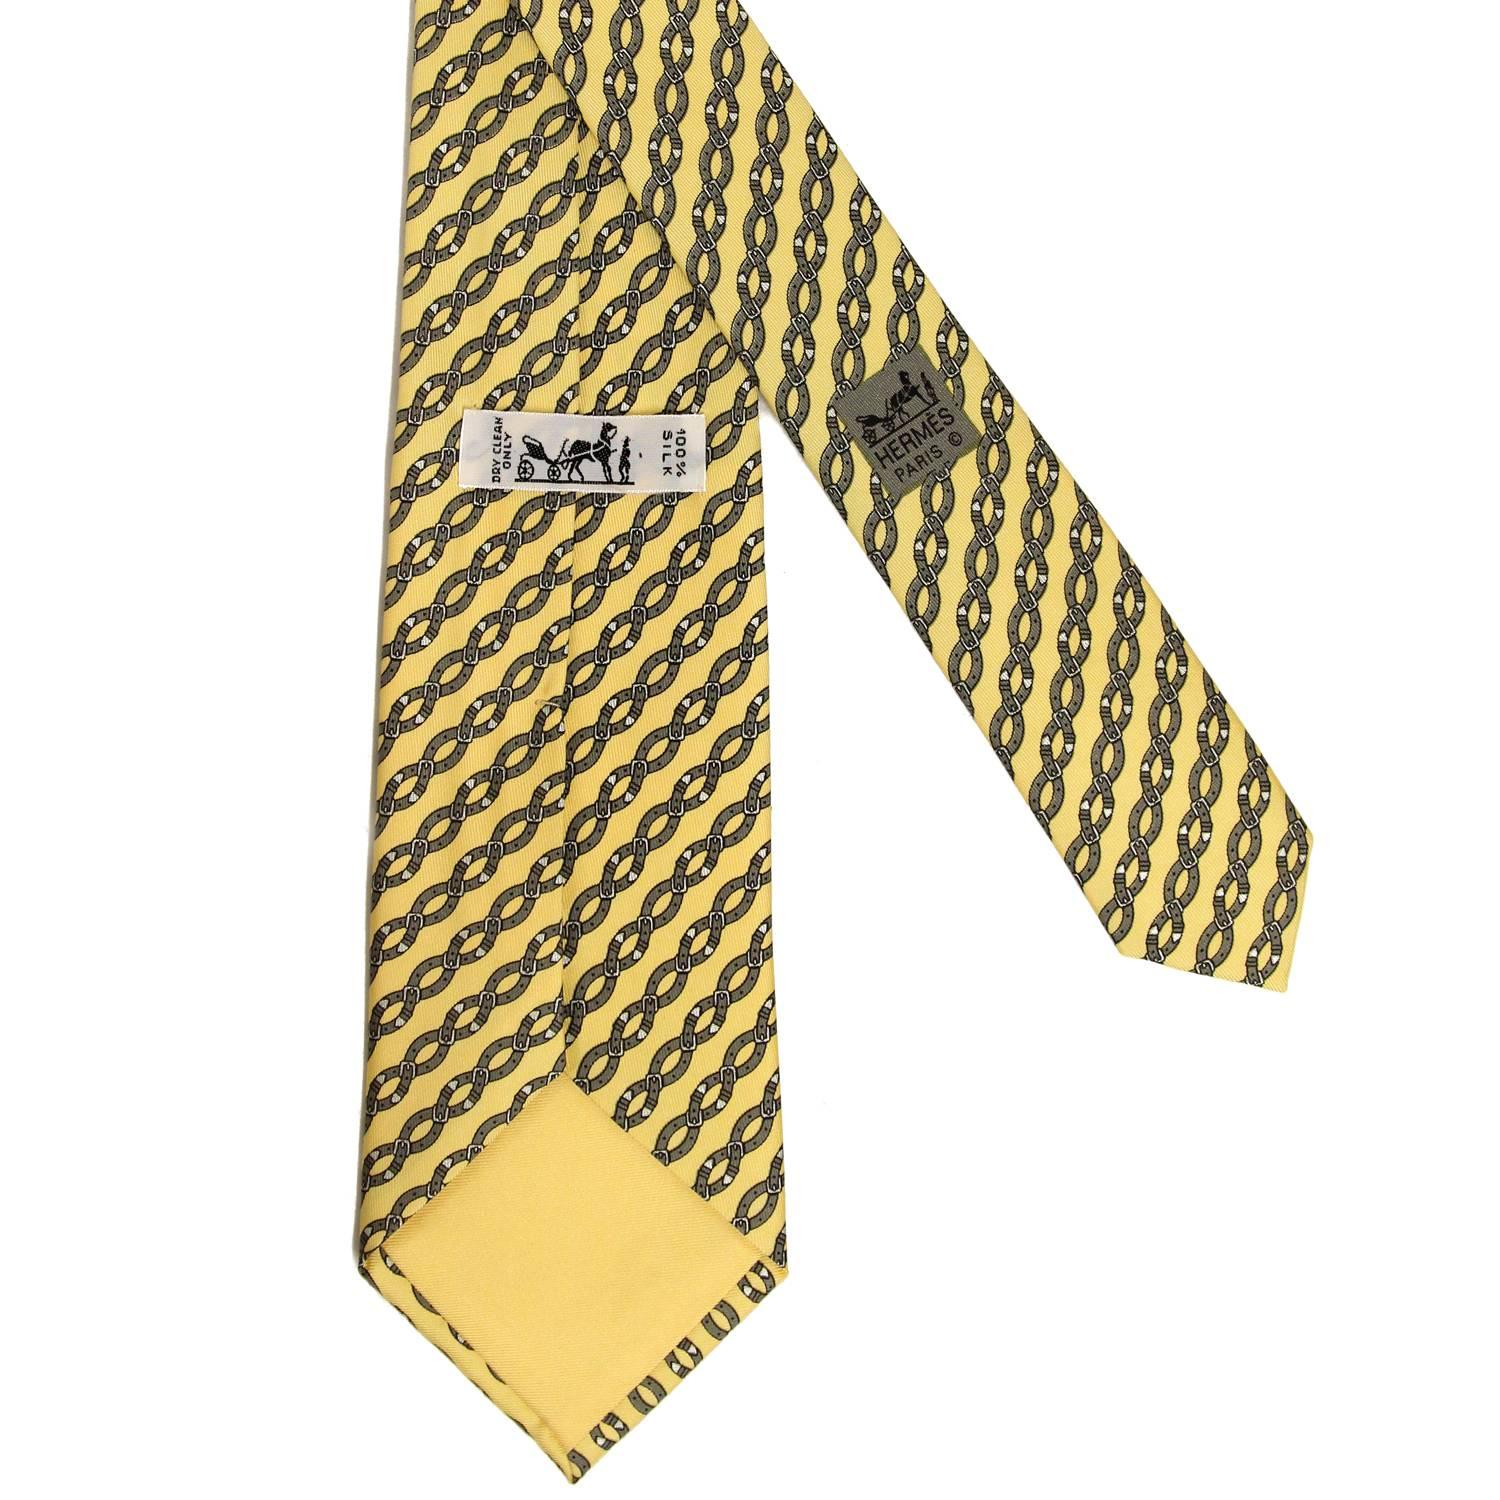 A.N.G.E.L.O. Vintage - Italy

Lively Hermès 100% silk printed tie in yellow and grey belts pattern. The item is vintage, it was produced in the 1990s and is in excellent conditions, flawless. Width: 8
